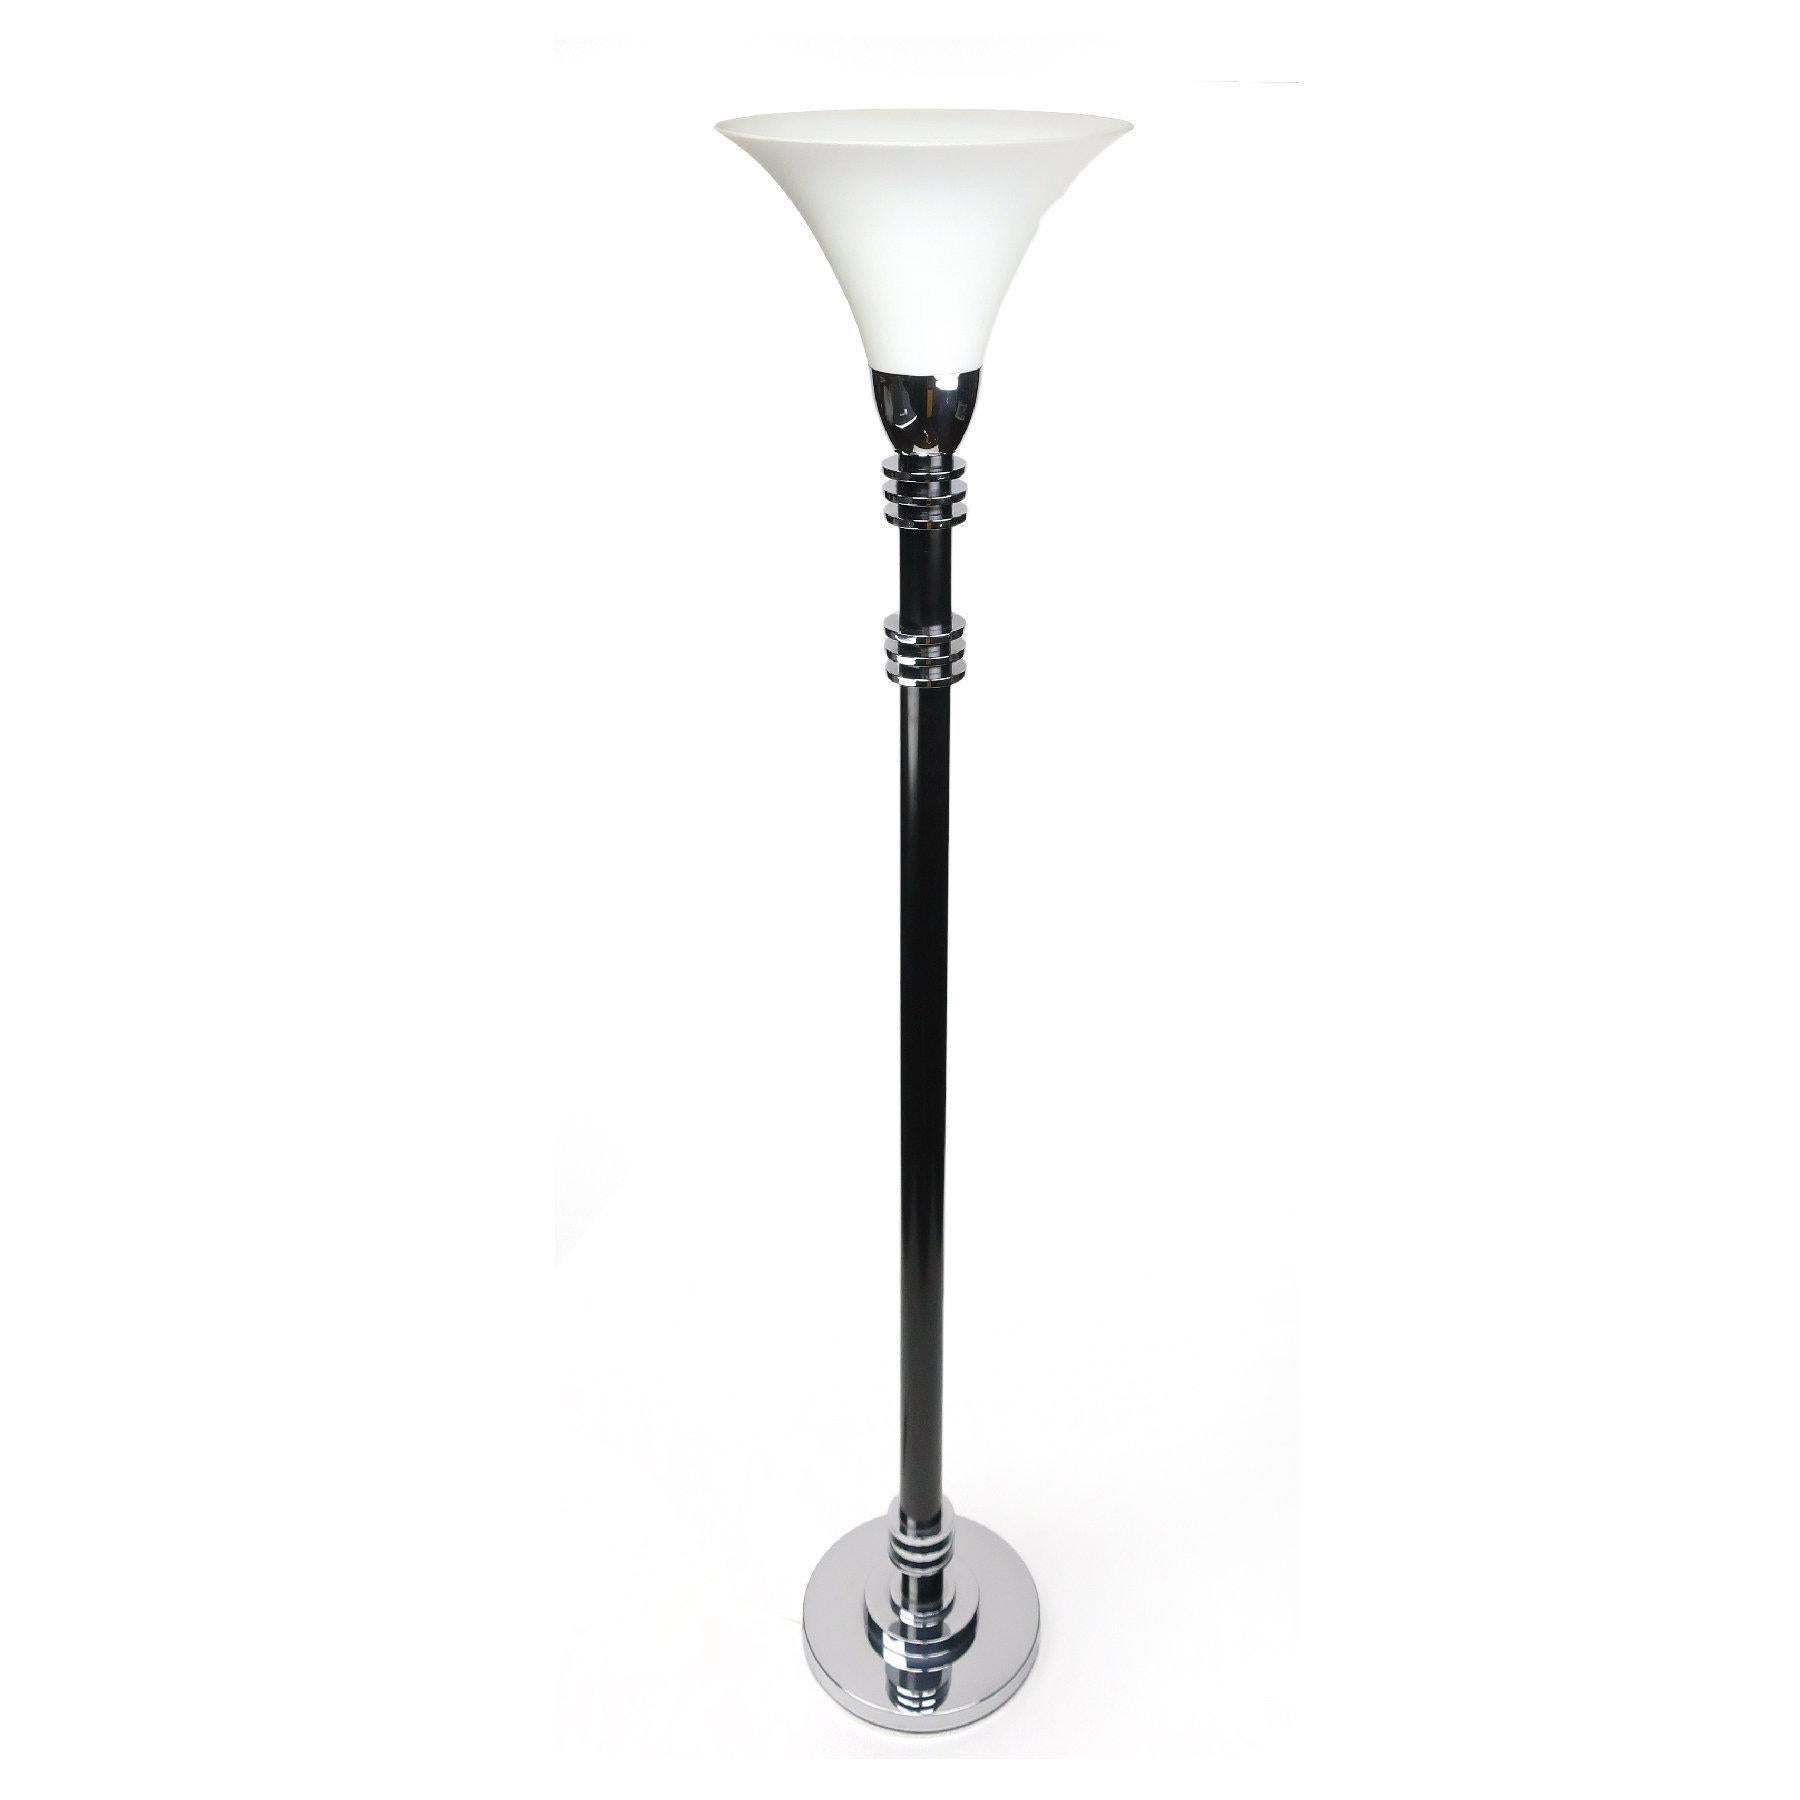 1980s Deco Floor Lamp by Jay Spectre for Paul Hanson For Sale